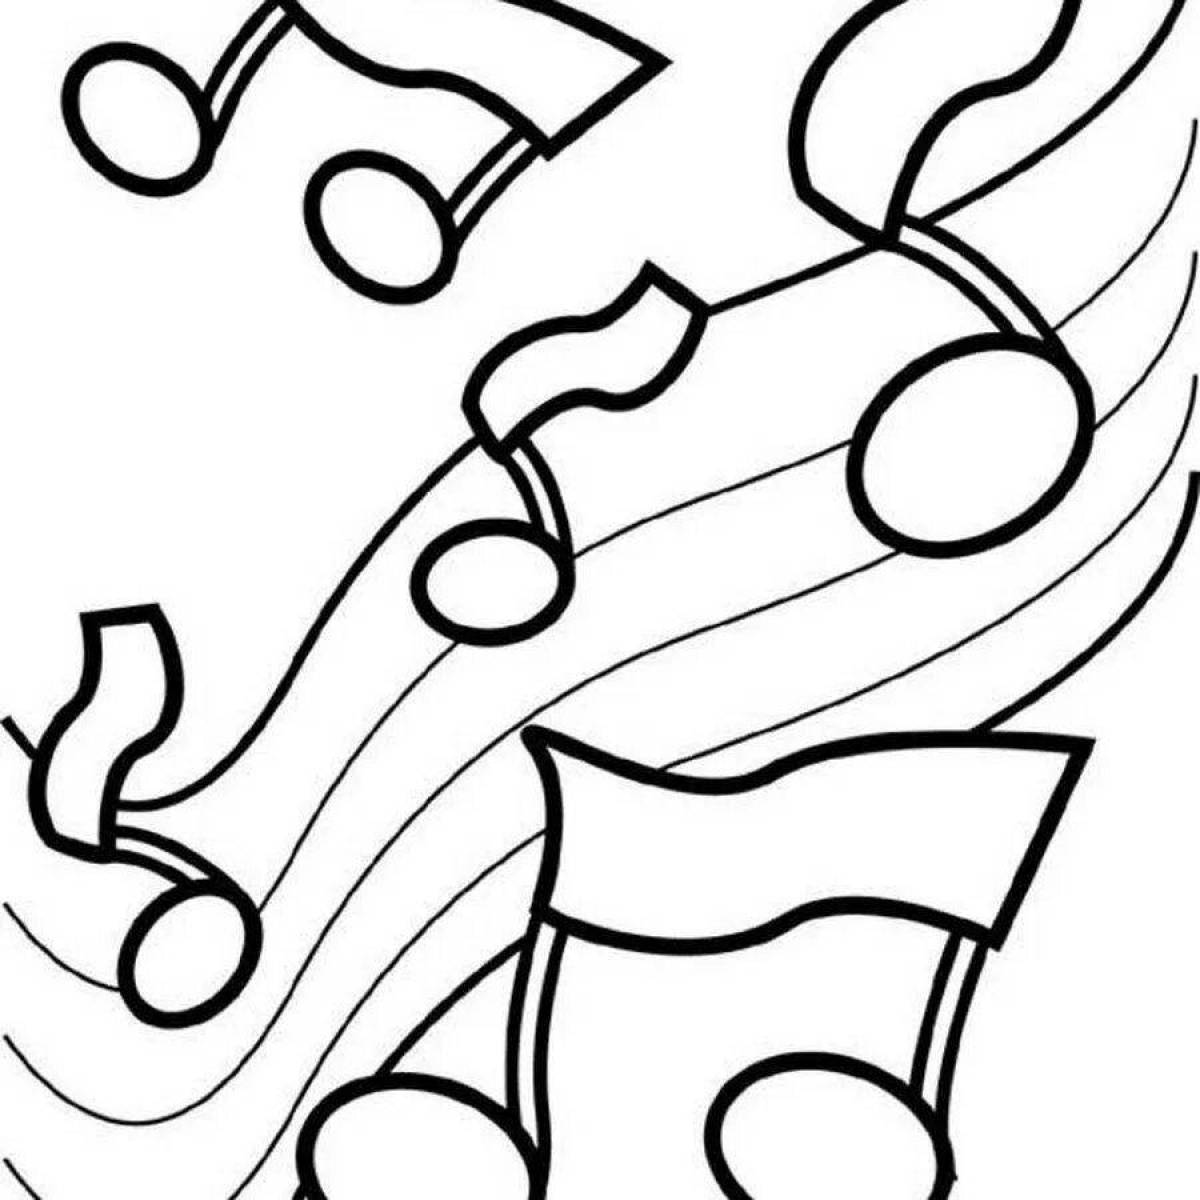 Creative music coloring book for kids